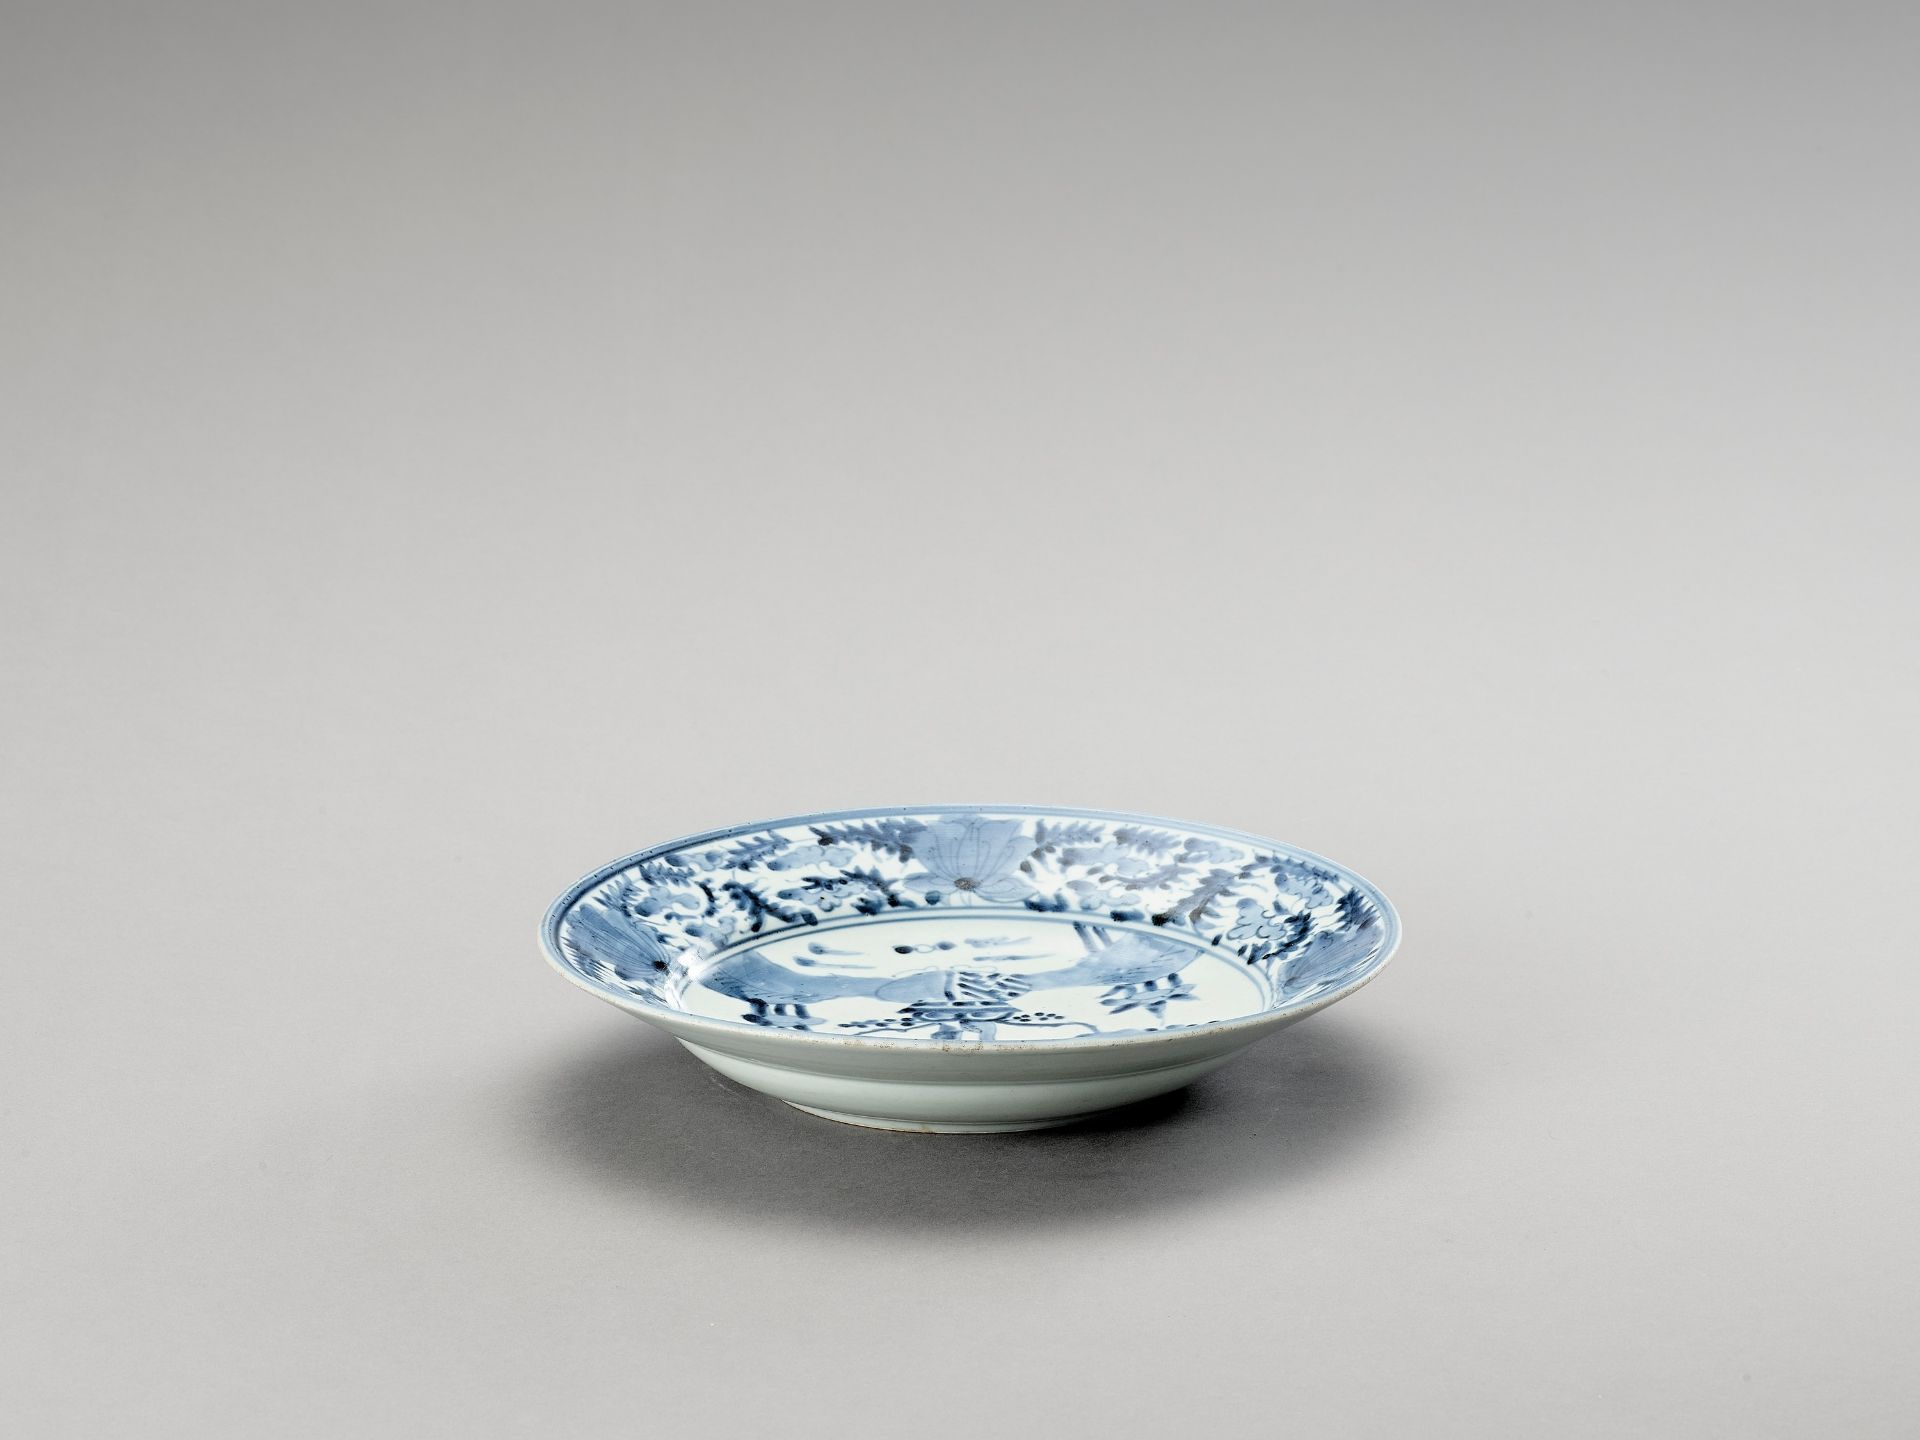 A 'KRAAK' STYLE BLUE AND WHITE PORCELAIN DISH - Image 4 of 4